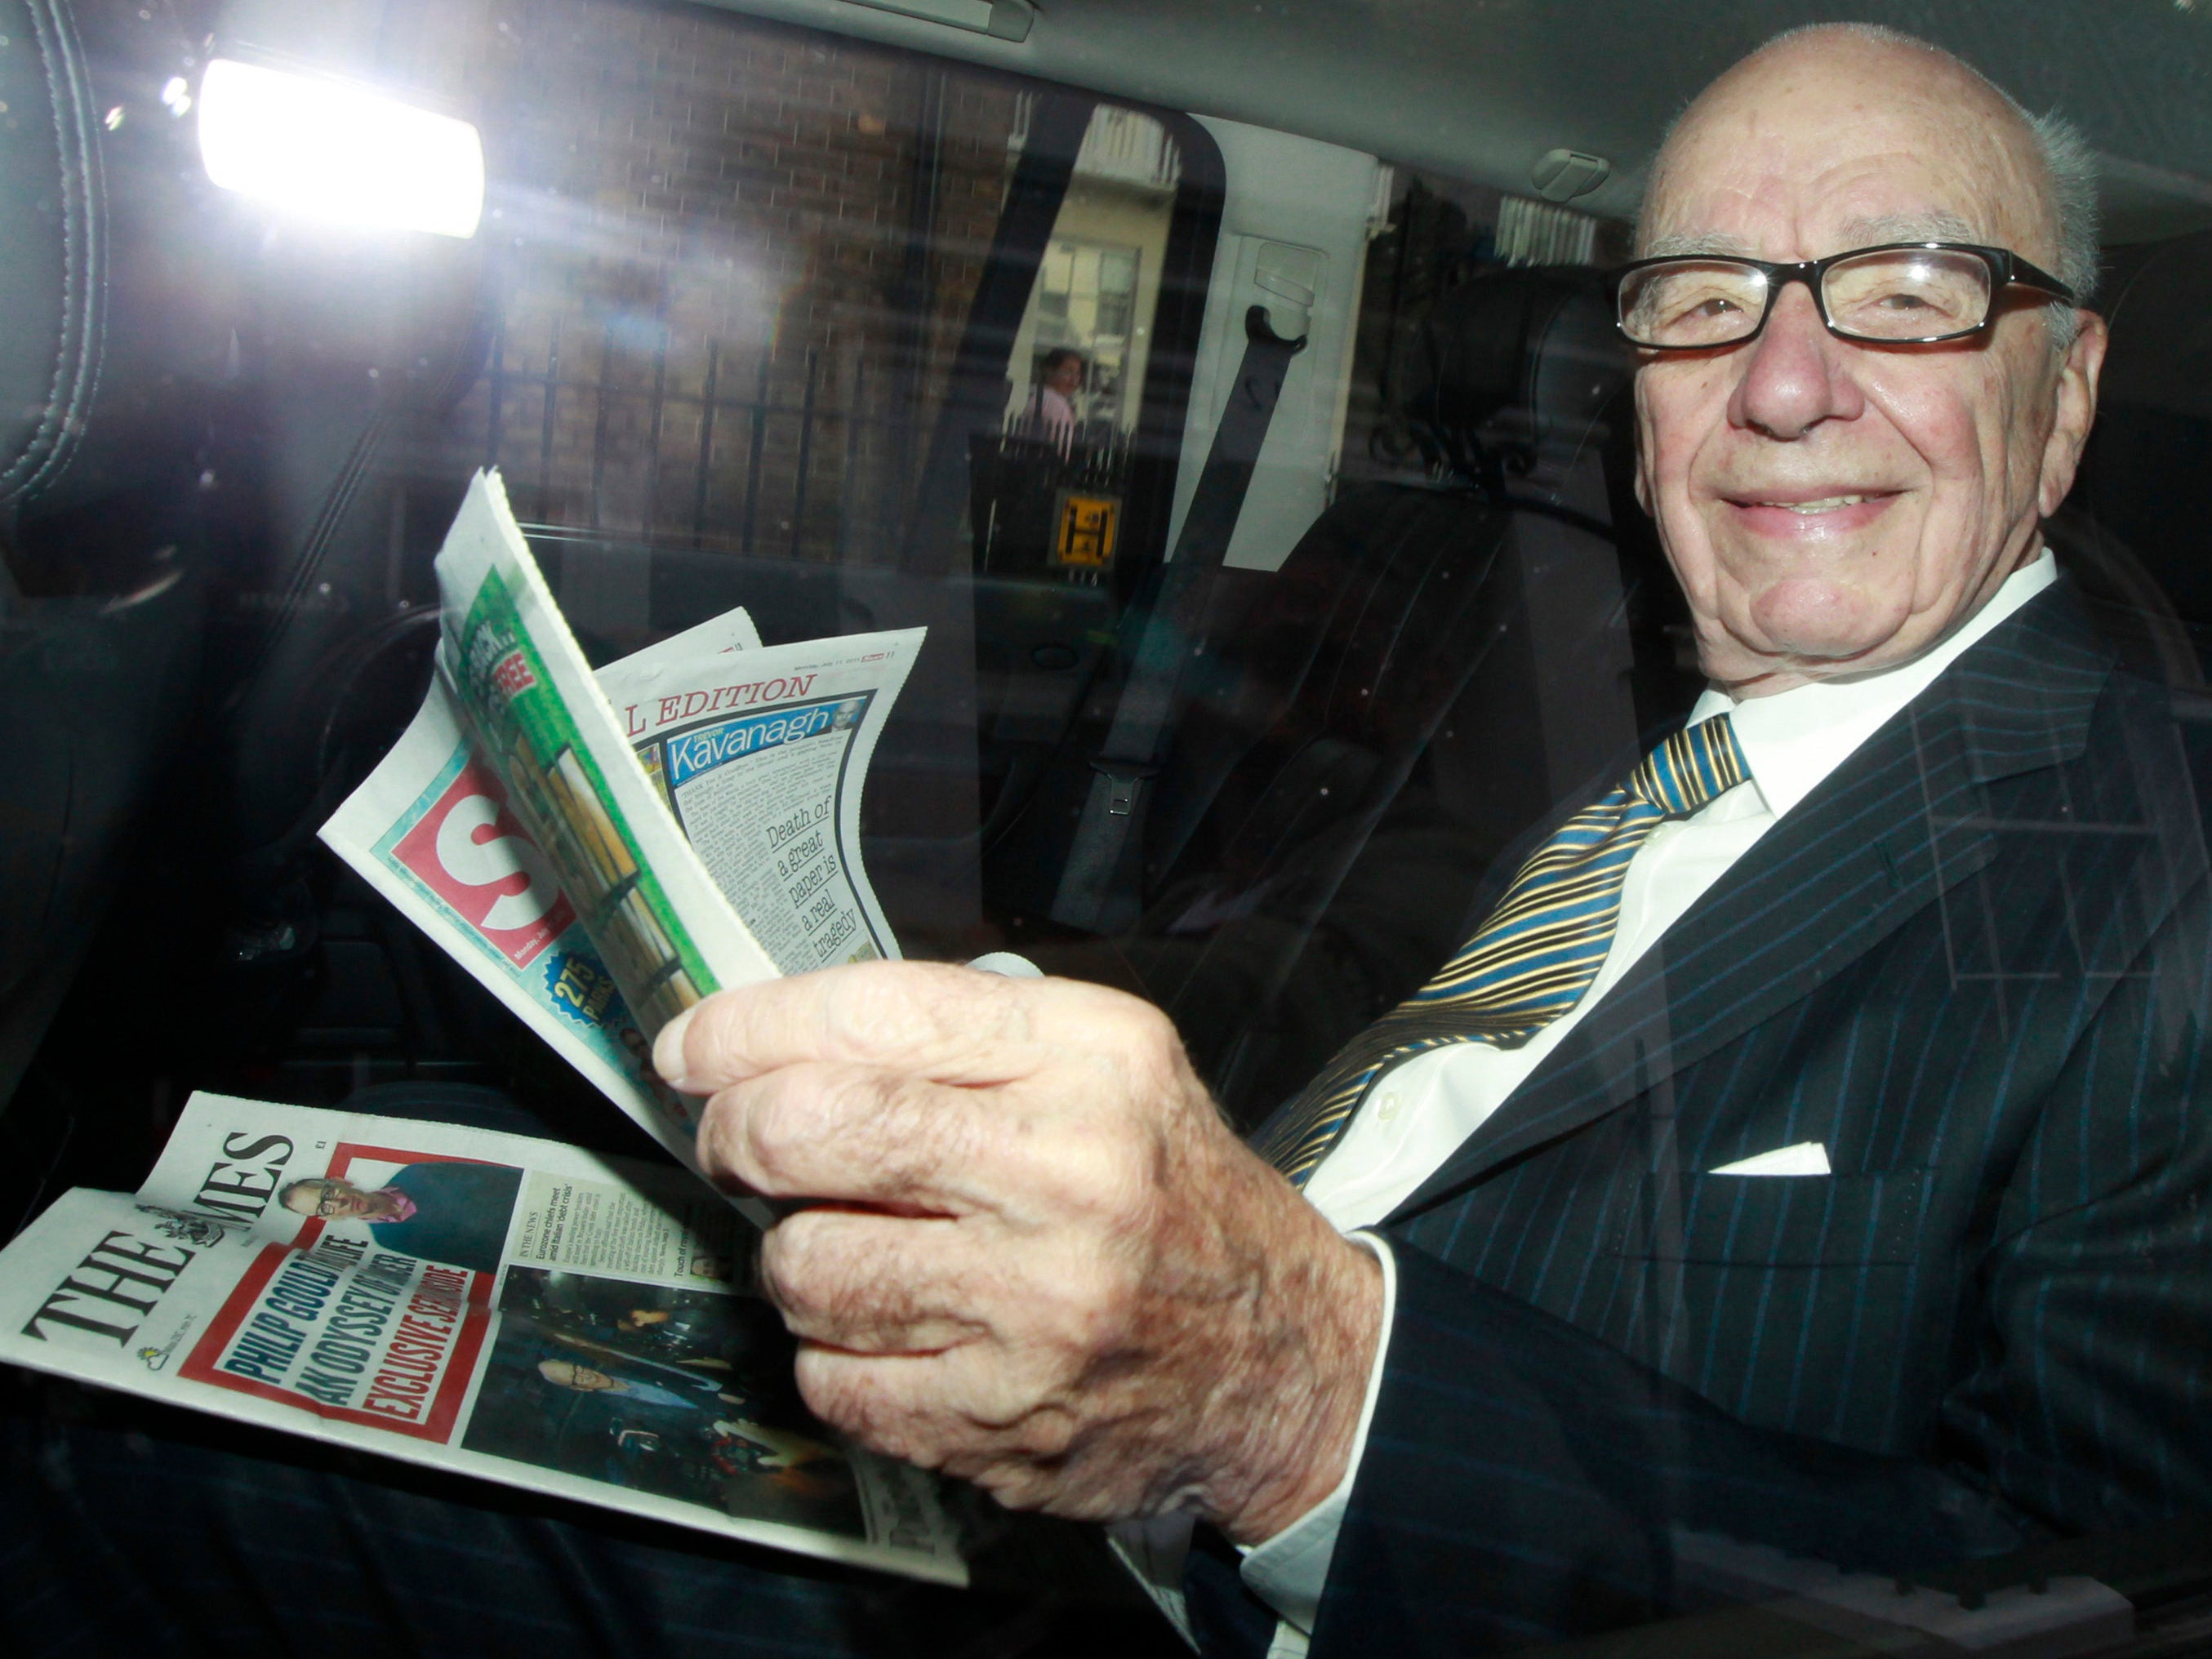 Times and Sun newspapers both see turnover fall by £22m year-on-year